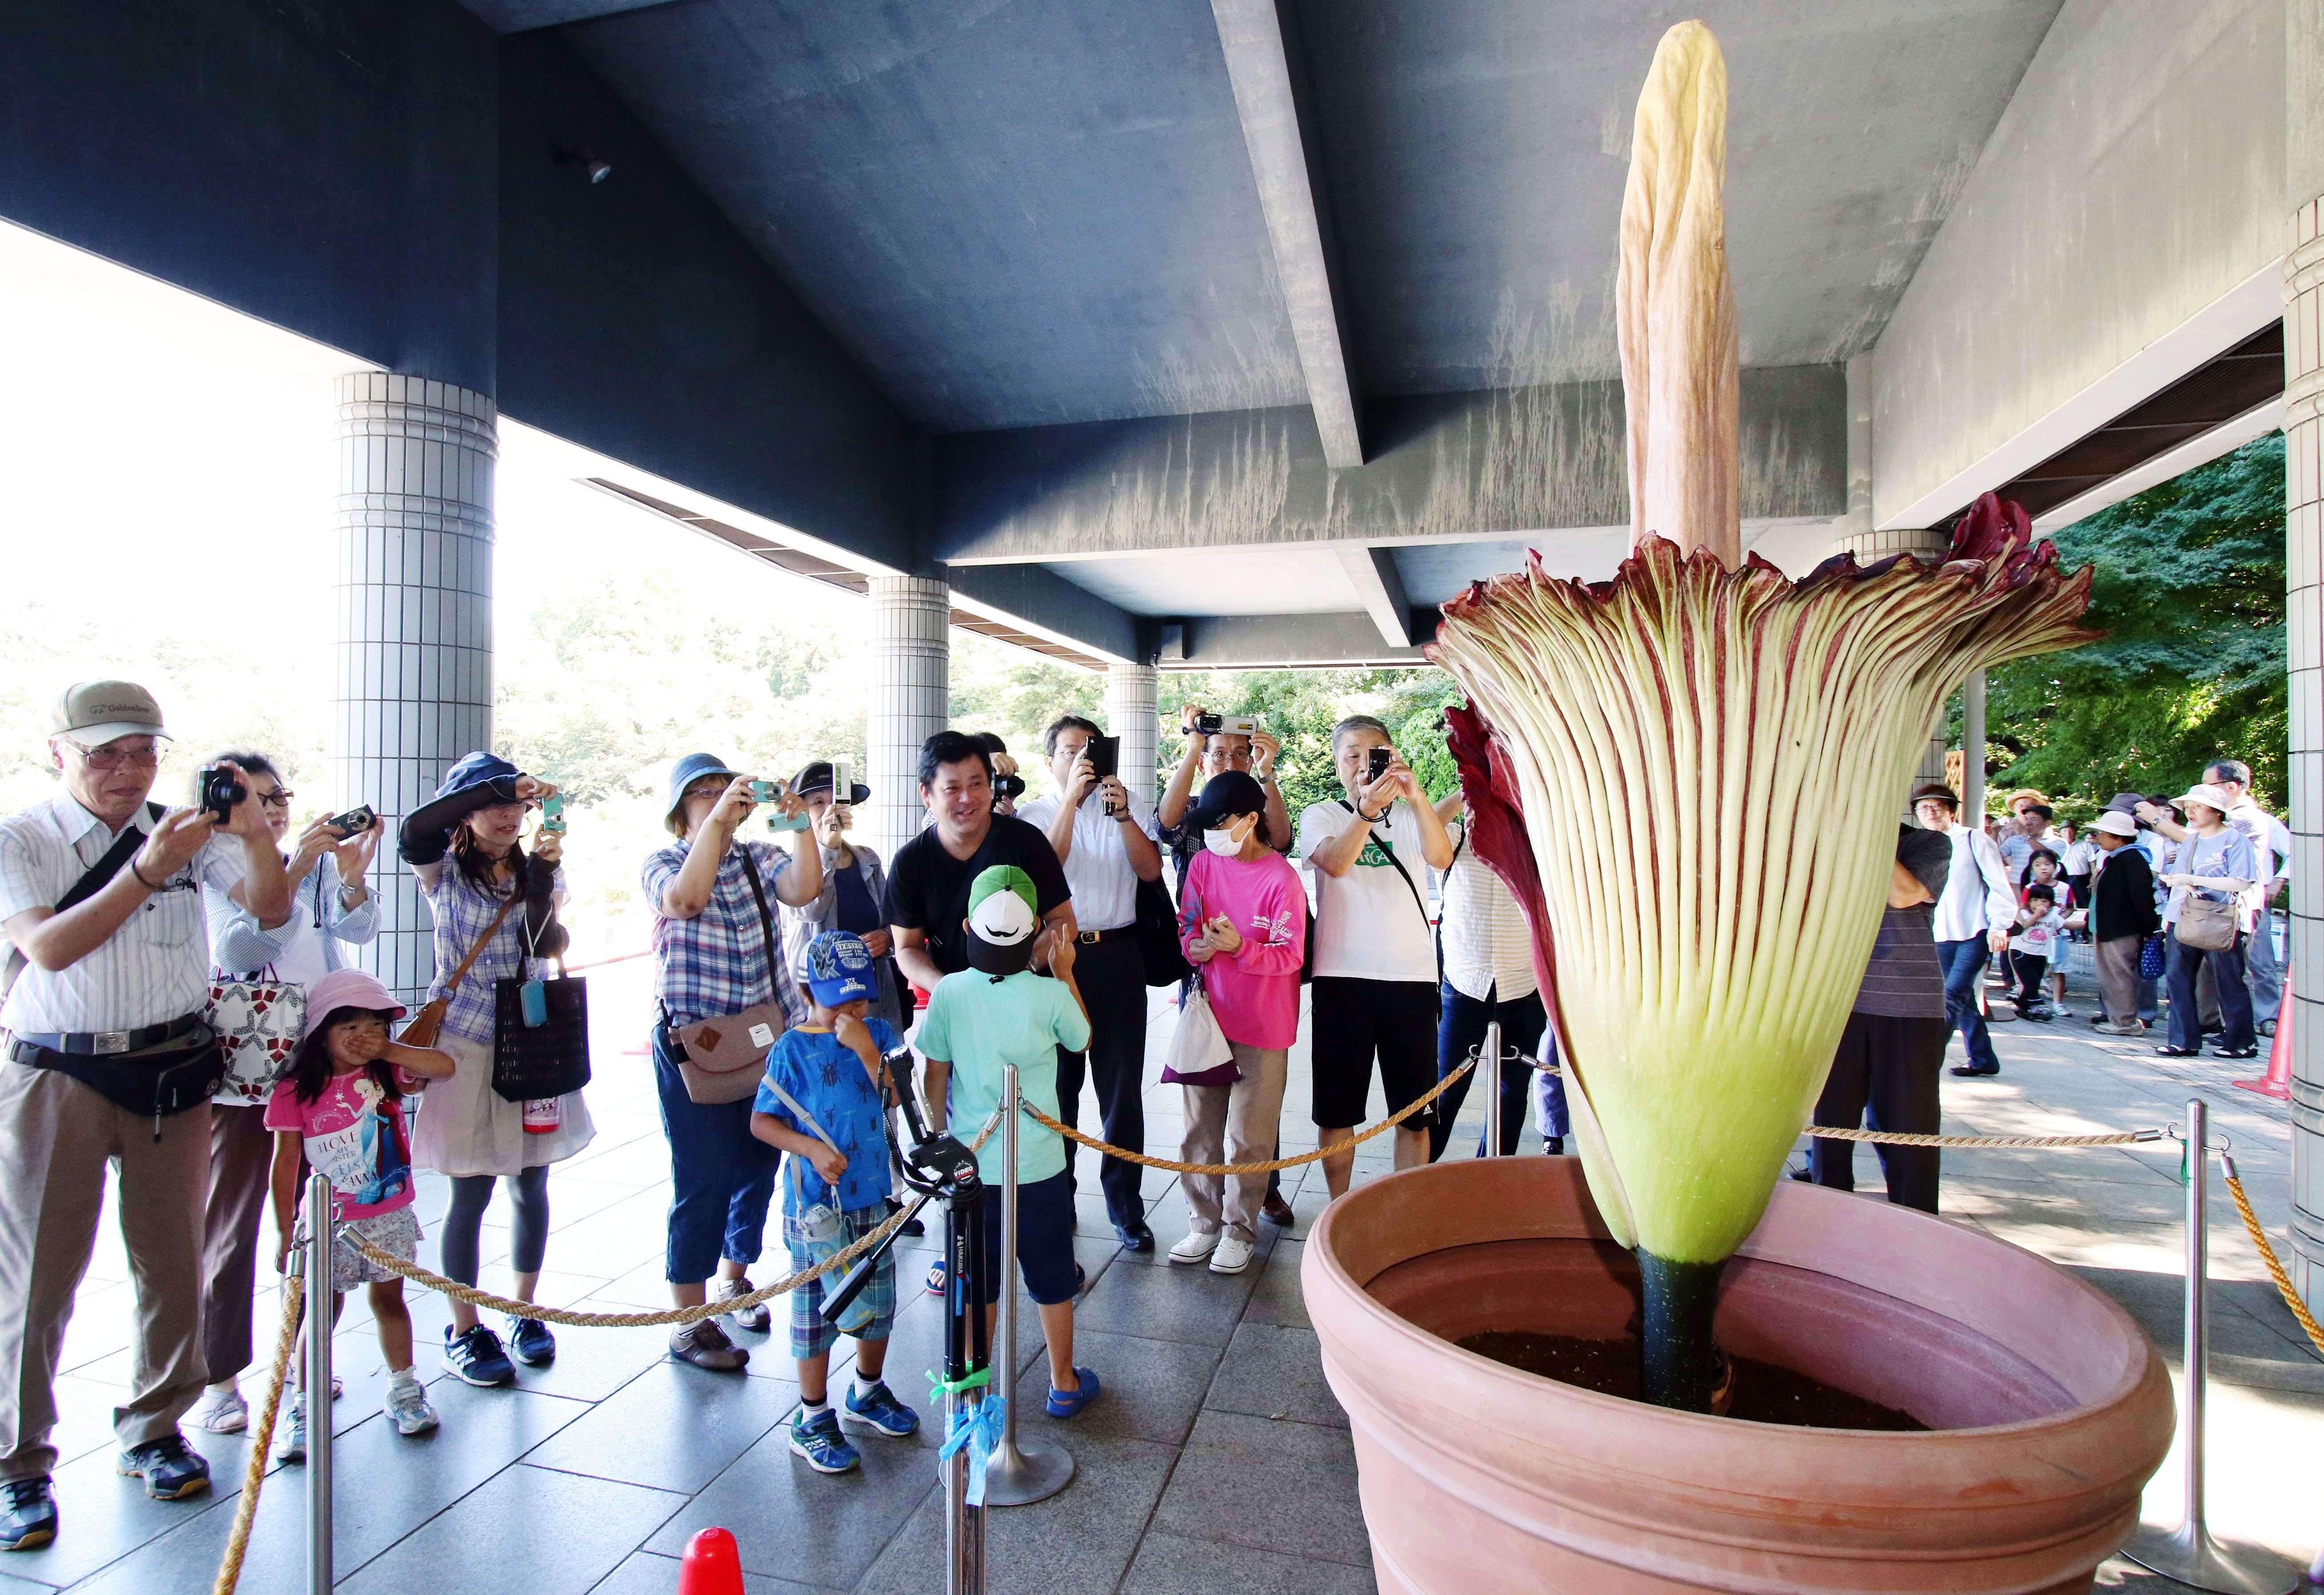 People admire a giant Titan Arum (Amorphophallus titanum) at the Jindai botanical gardens in Tokyo on July 22, 2015 after the flower started to bloom on July 21. The Indonesian plant has the world's largest blossom, standing 1.9 metres in height and smelling like decaying flesh to attract beetles. Hundreds of visitors queued to watch the rare flower which opens for only one or two days.   AFP PHOTO / Yoshikazu TSUNO